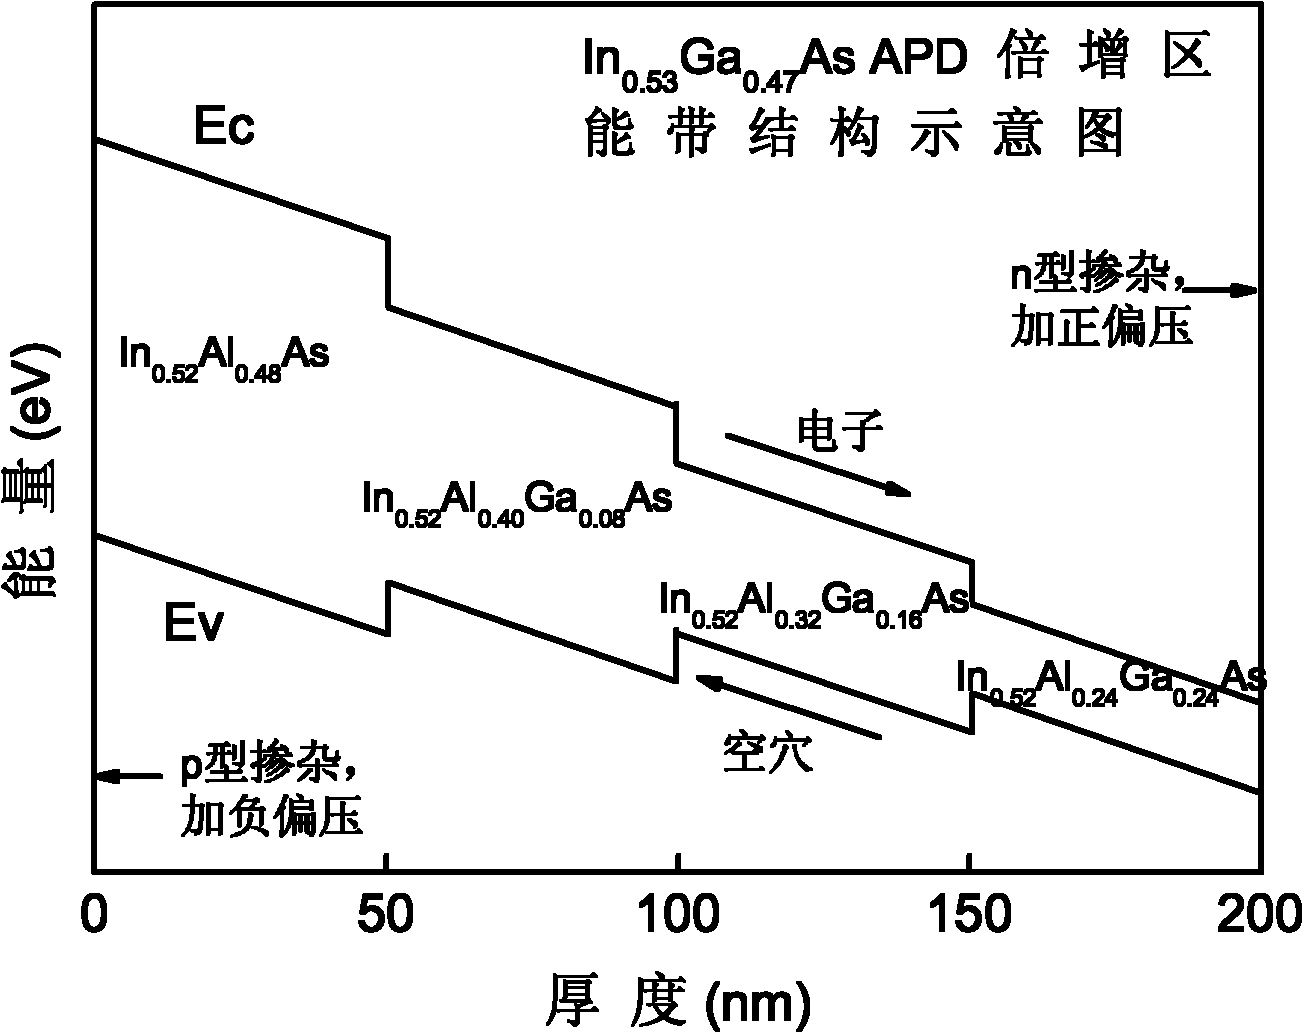 Energy band transmutation multiplication region structure for avalanche photodiode, and preparation method of energy band transmutation multiplication structure